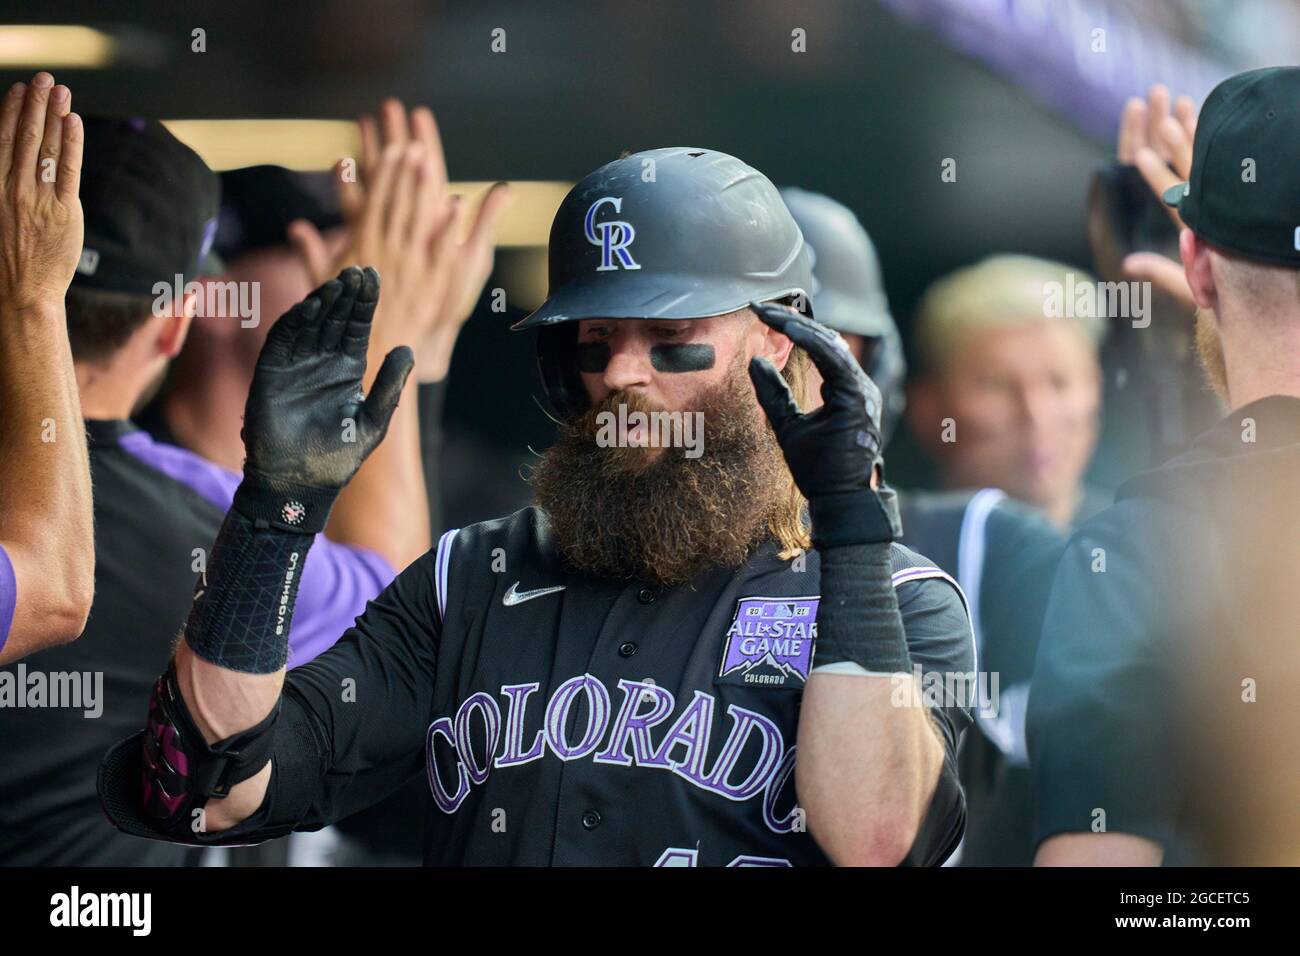 3,000 Charlie blackmon Stock Pictures, Editorial Images and Stock Photos